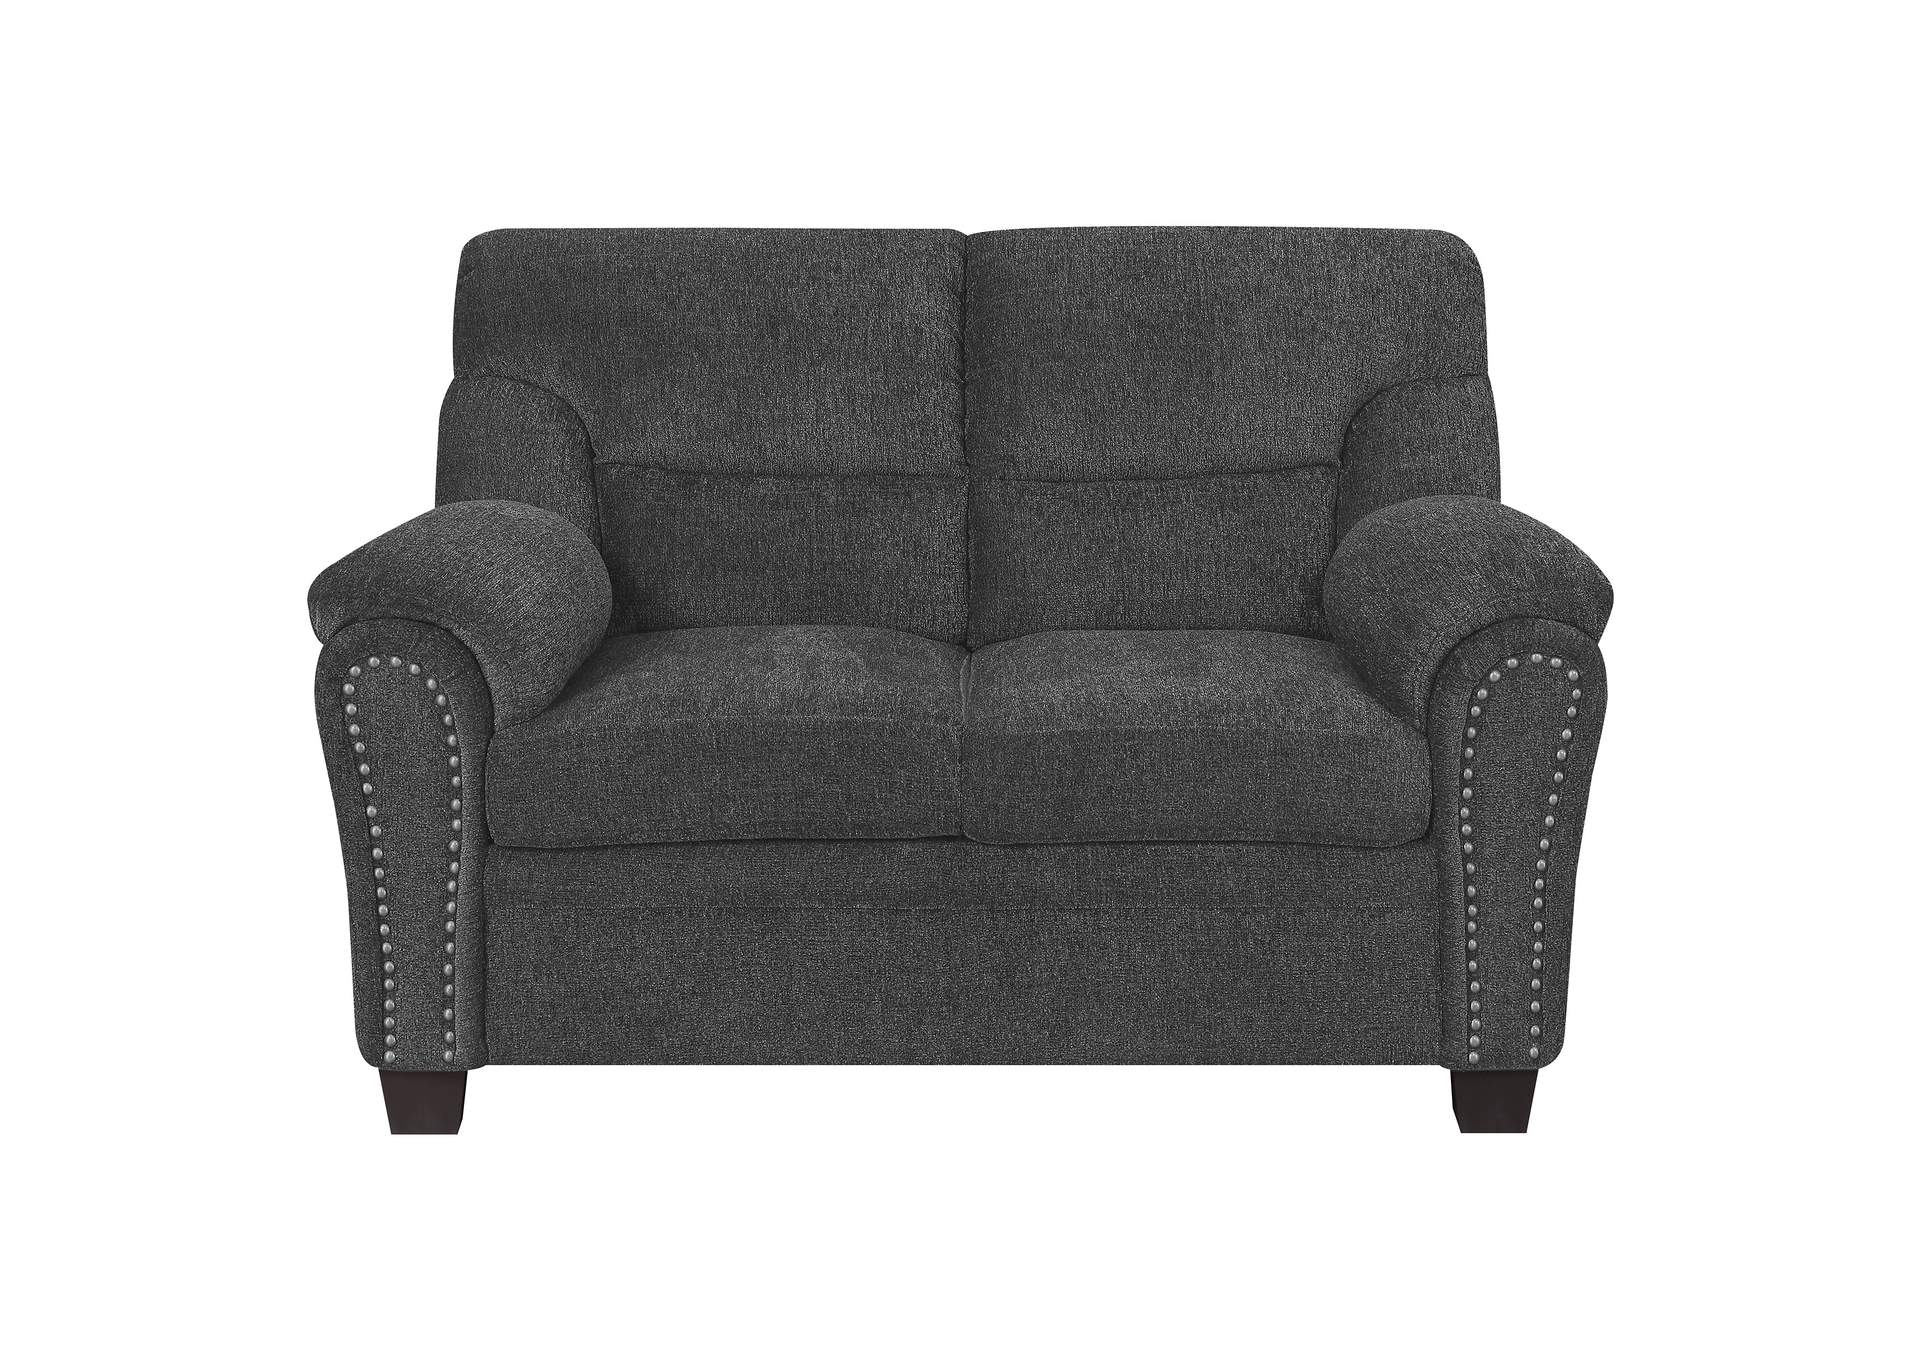 Clementine Upholstered Loveseat with Nailhead Trim Grey,Coaster Furniture